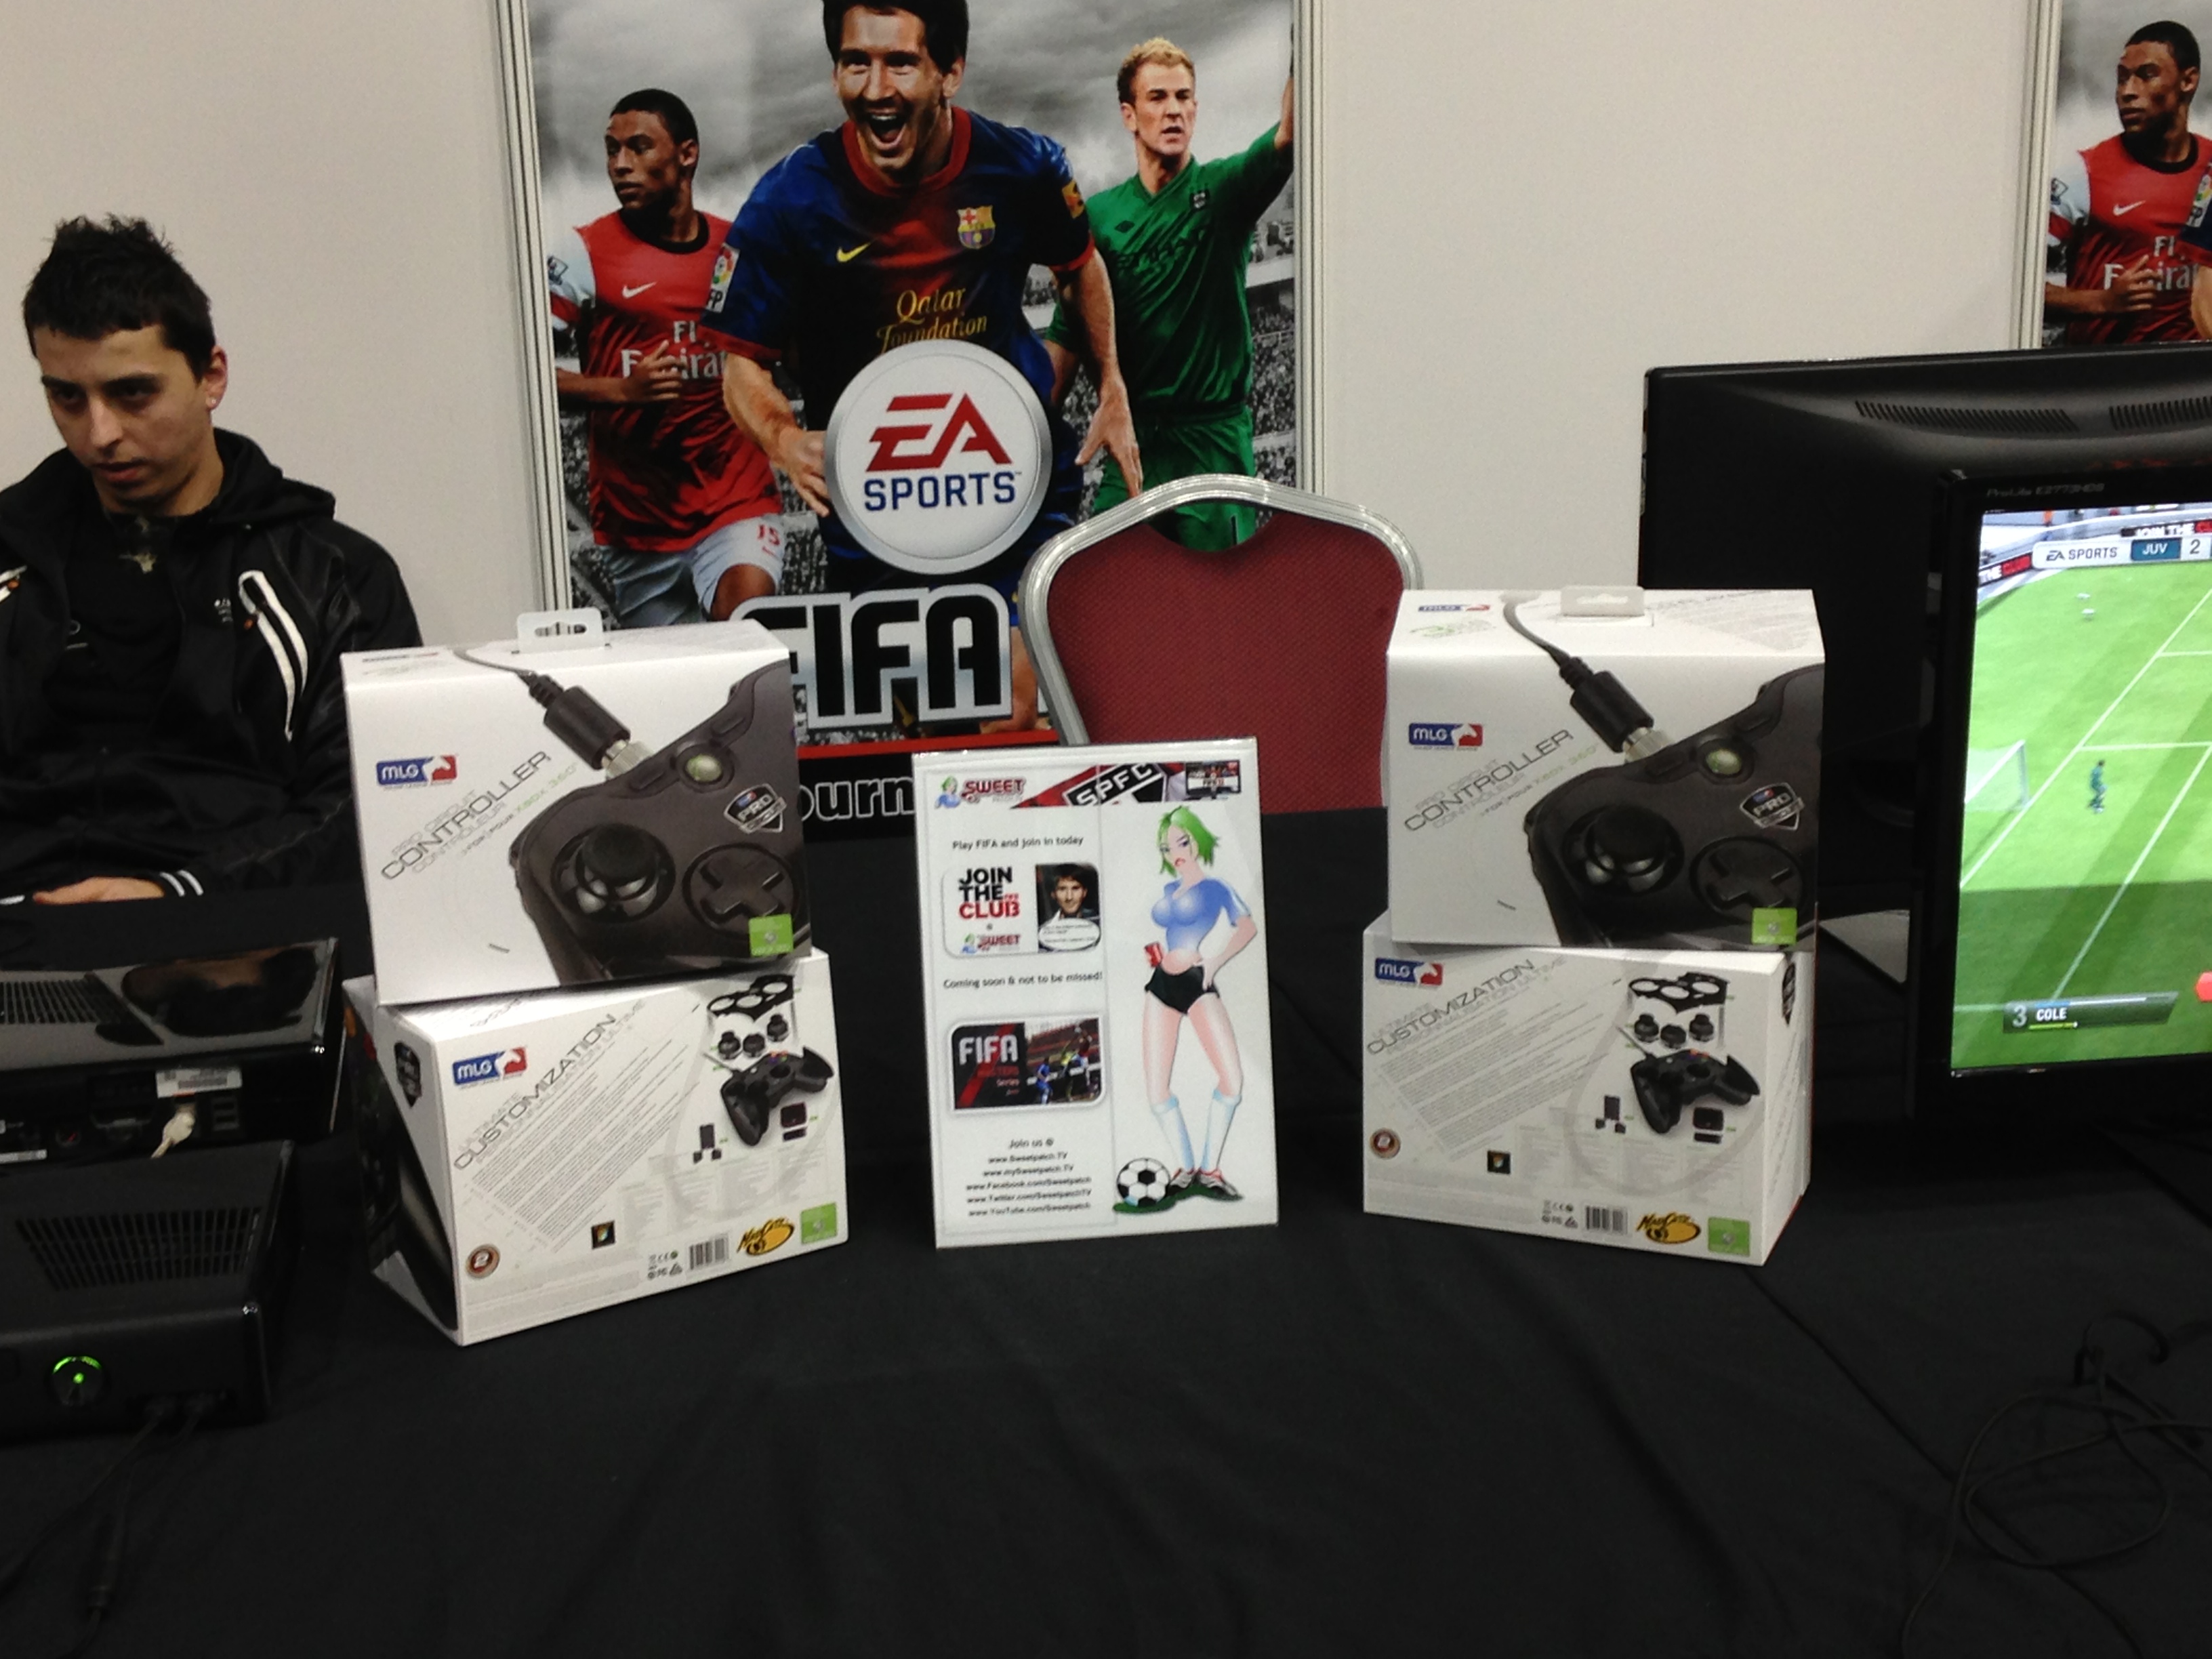 Mad Catz have kindly sponsored the i47 FIFA 13 Tournament Arena